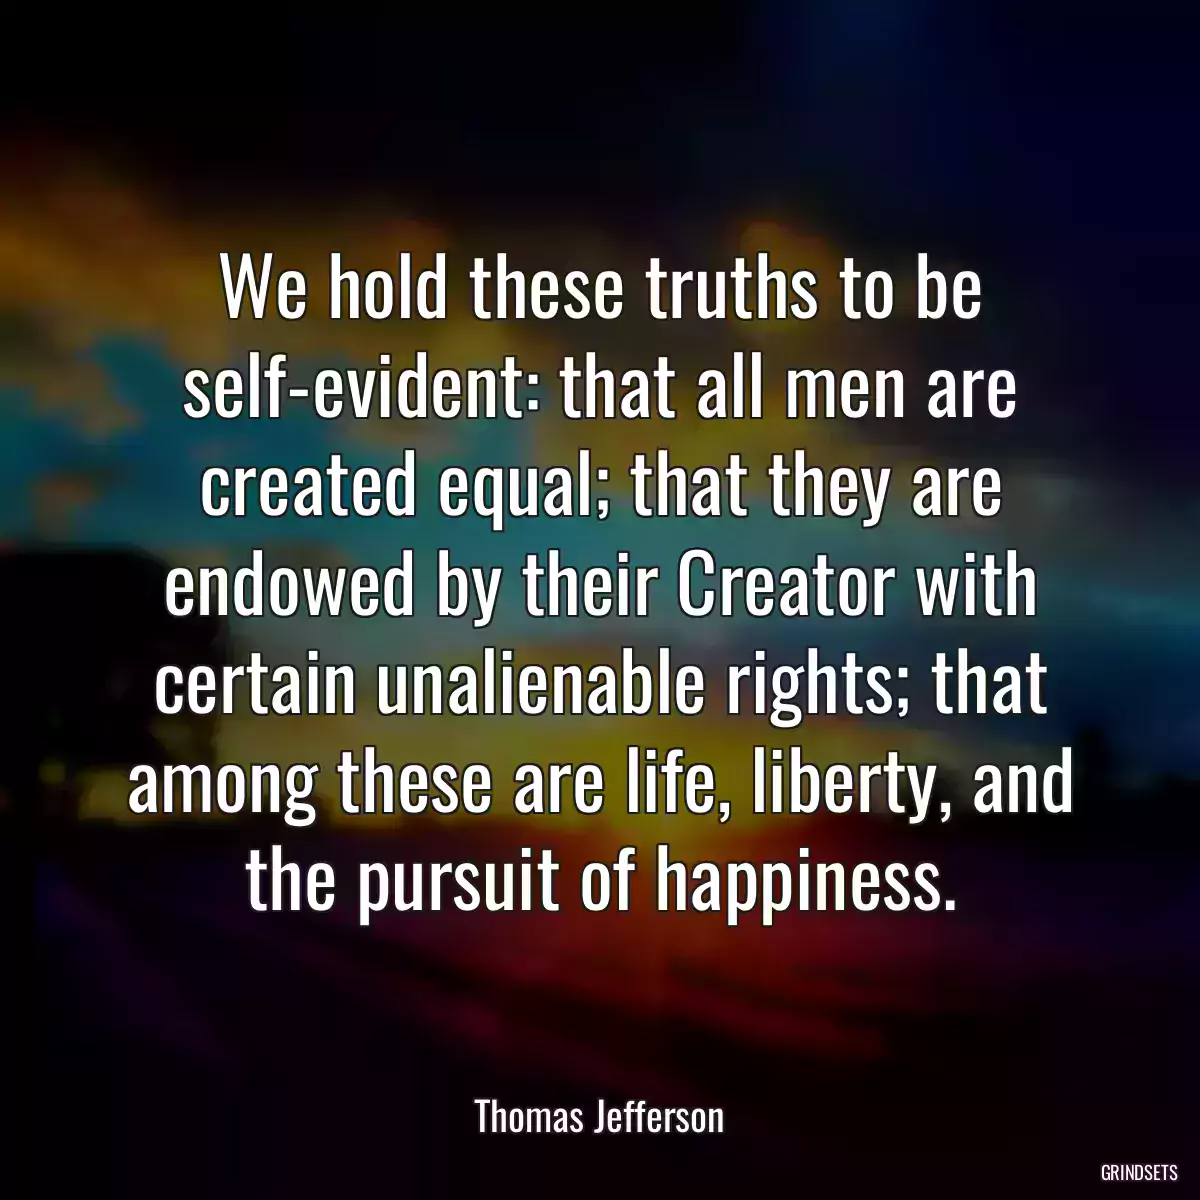 We hold these truths to be self-evident: that all men are created equal; that they are endowed by their Creator with certain unalienable rights; that among these are life, liberty, and the pursuit of happiness.